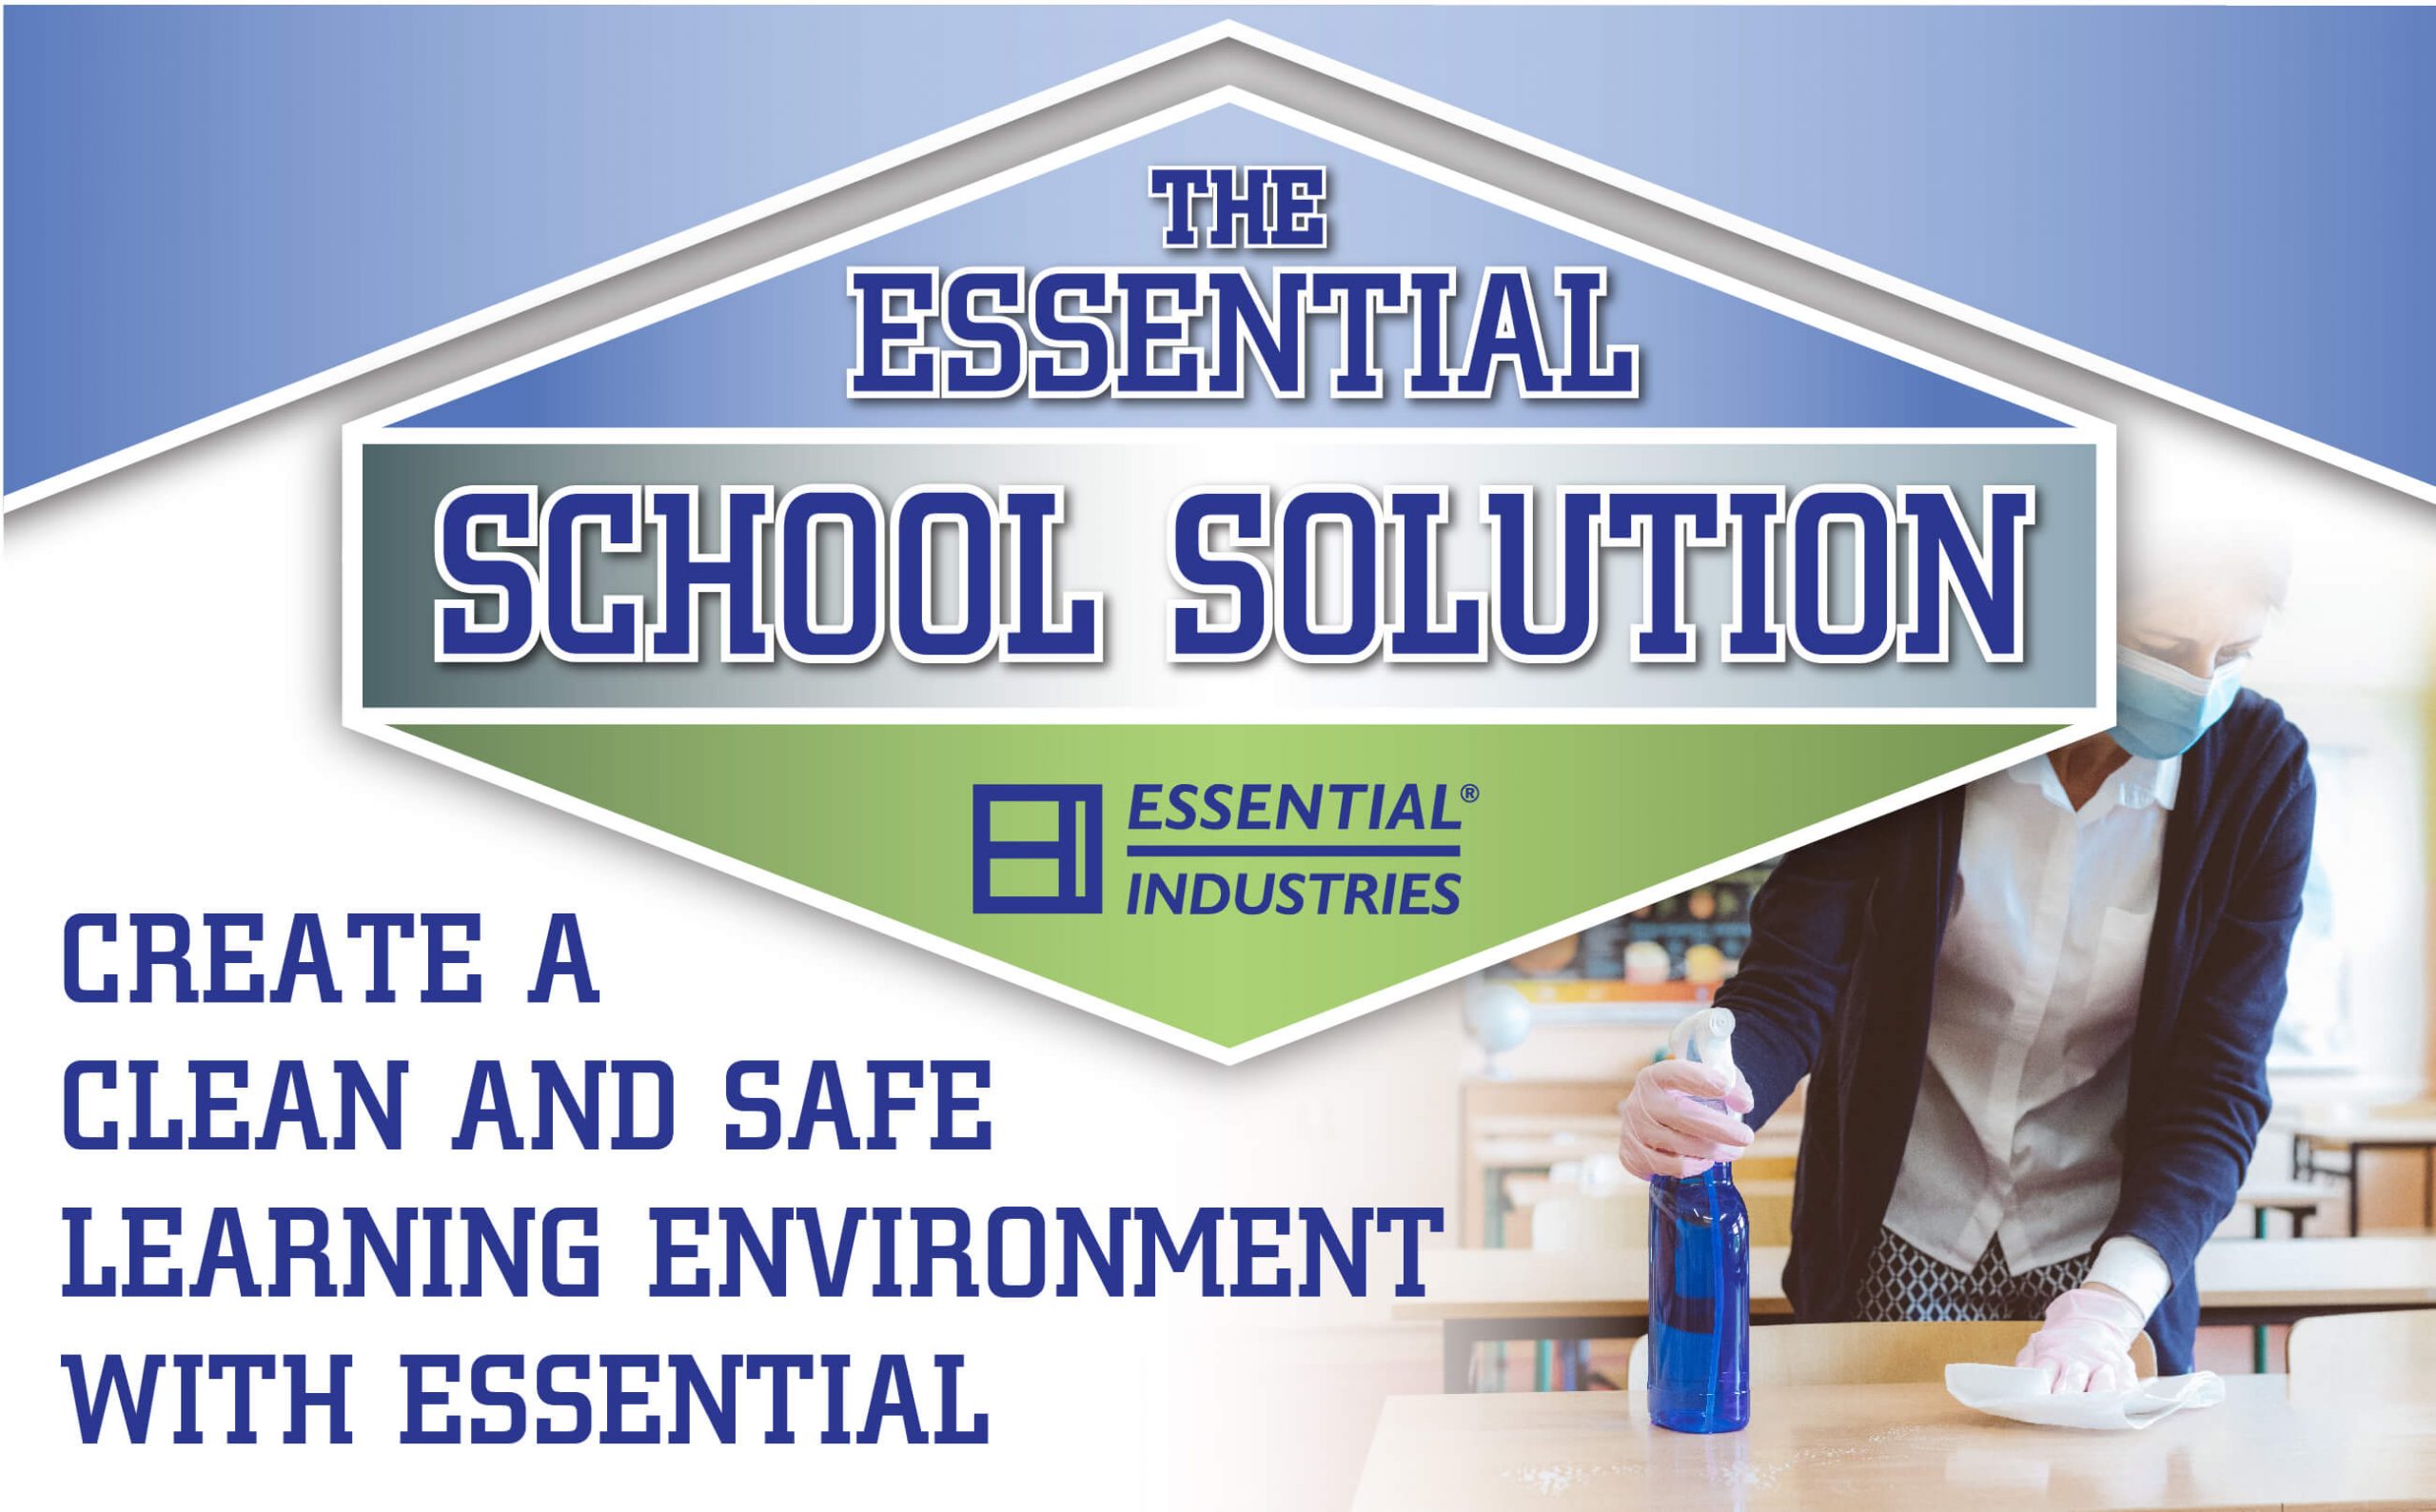 Create a Clean and safe learning environment with essential